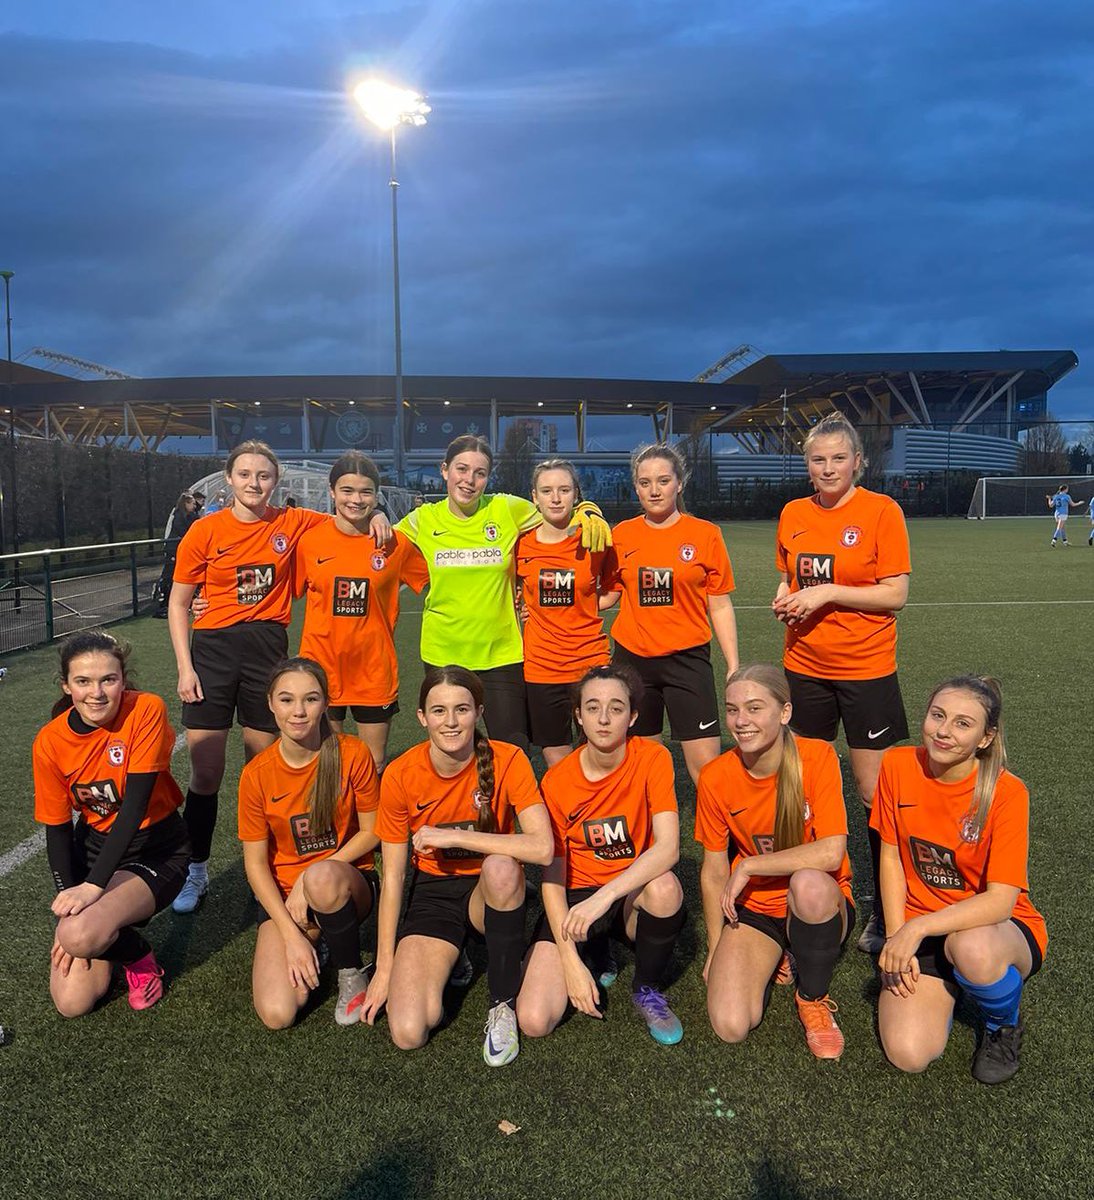 Thanks to @5haw4 for inviting the #under17s to play @ManCityAcademy RTC tonight ! 

A great experience for the girls against quality opponents ! 

#Bestwecanbe #Takeyourchance #Playforyourtown 

🟠⚫️⚽️